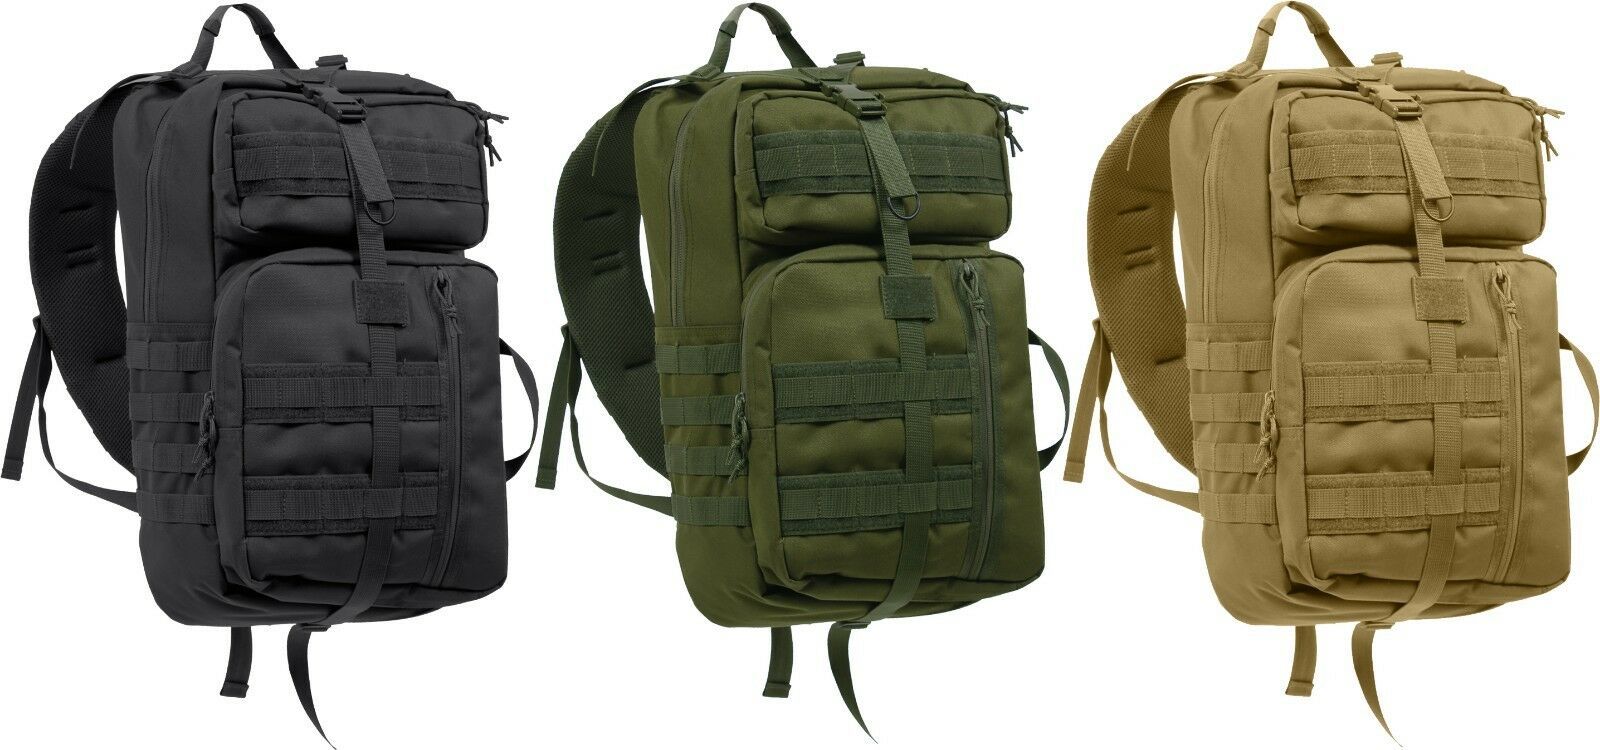 Tactical Sling Trasport Pack Crossbody Bag Army MOLLE Strap Concealed Carry CCW - Backpacks ...